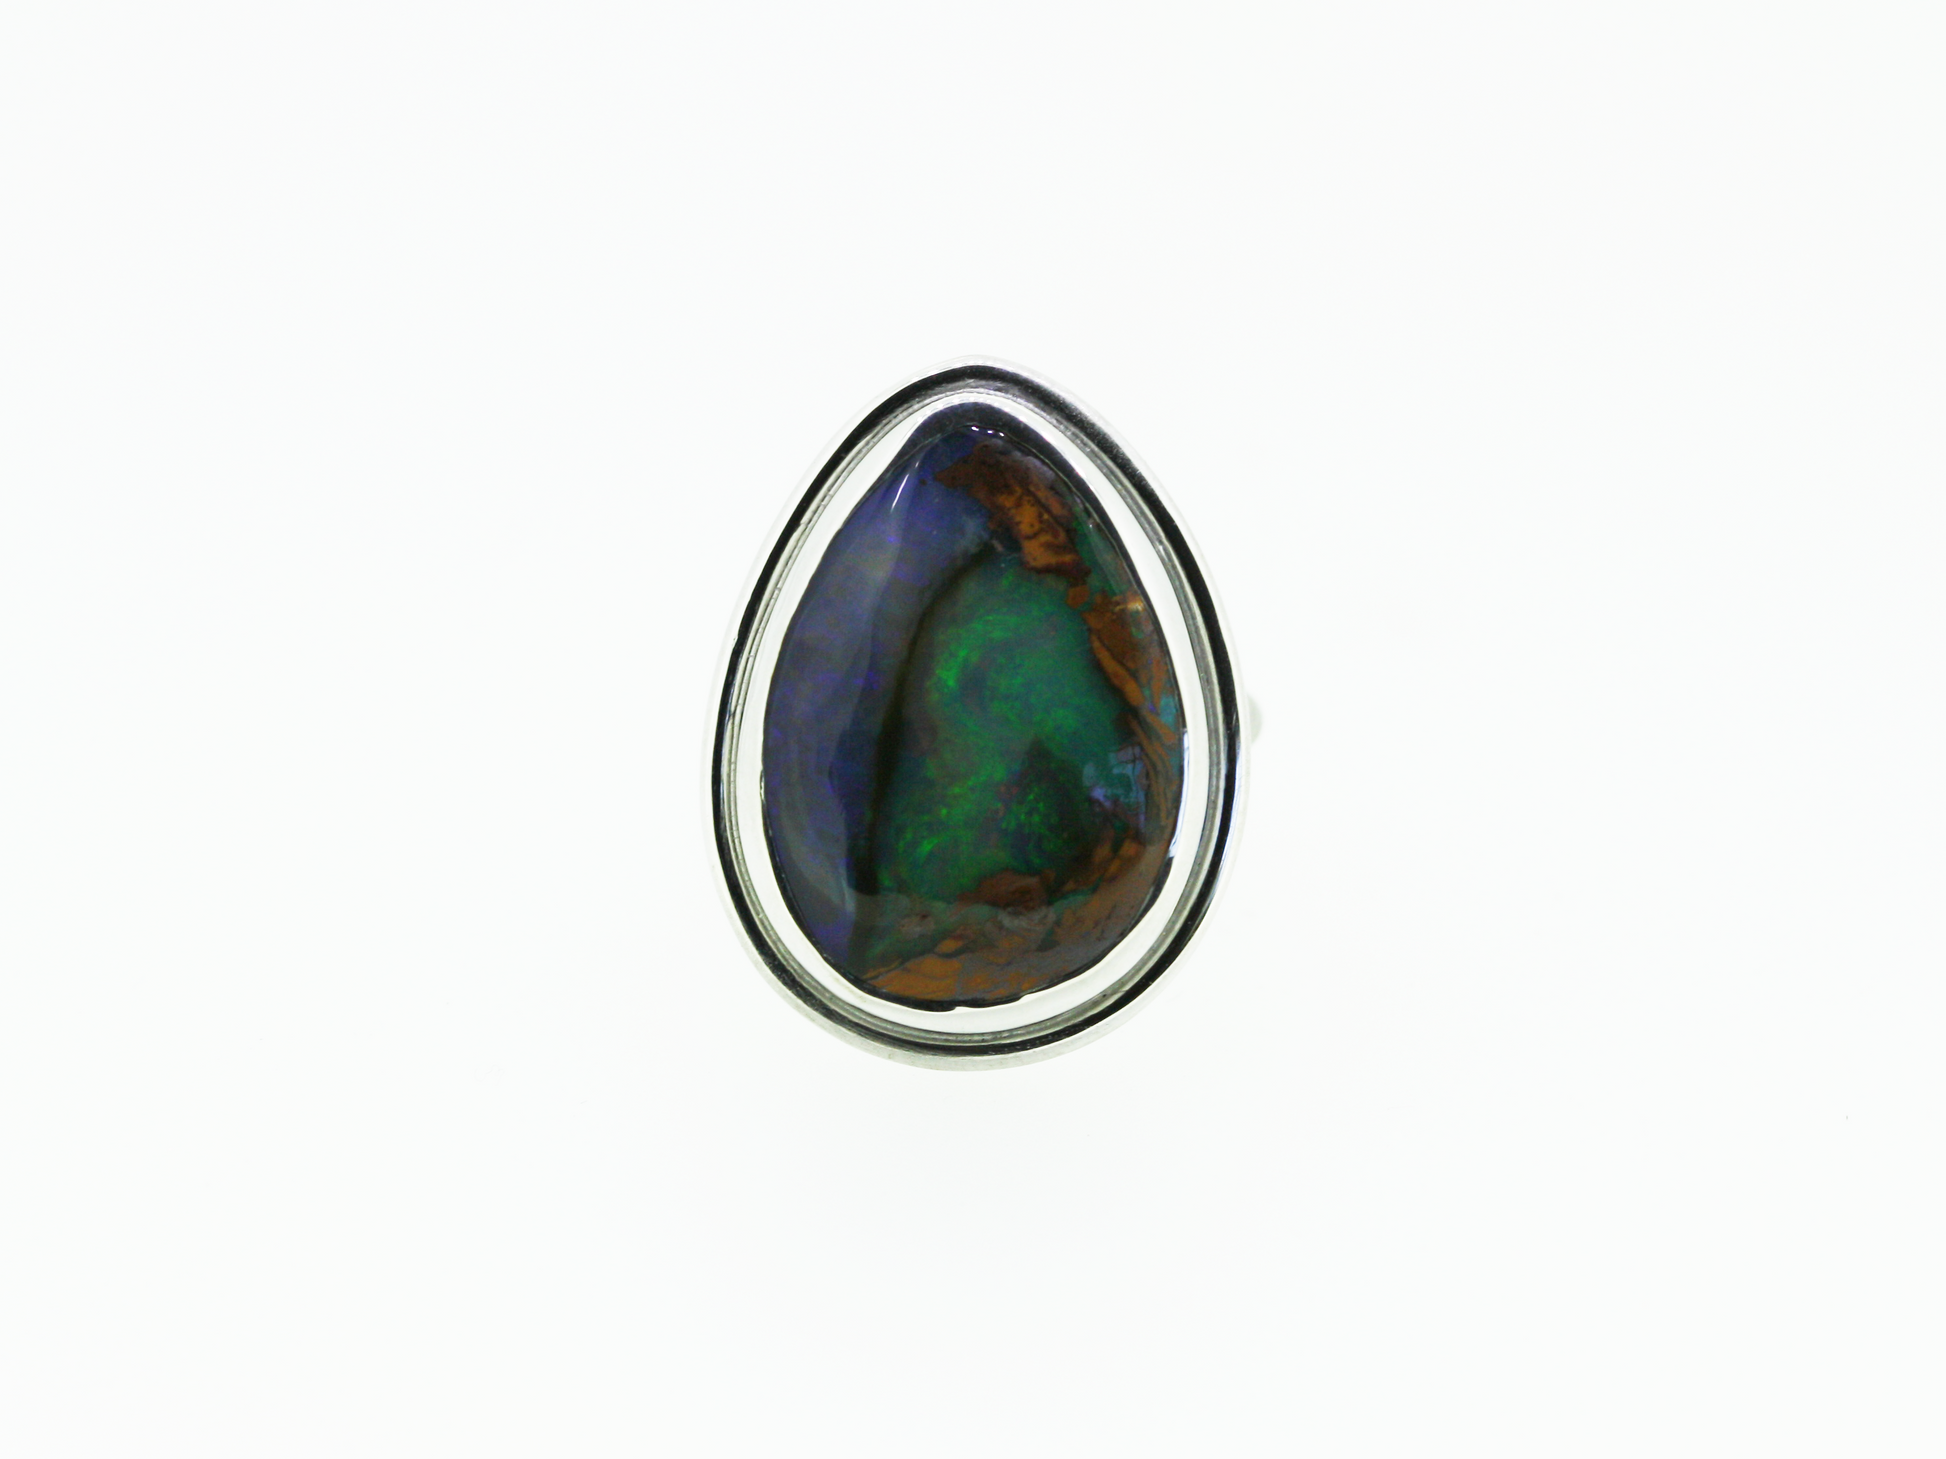 Queensland Boulder opal set in silver bezel with twisted band. Large green and red opal. Hand crafted in Brisbane studio using ethically sourced materials. Australian made sparkling opal ring. 